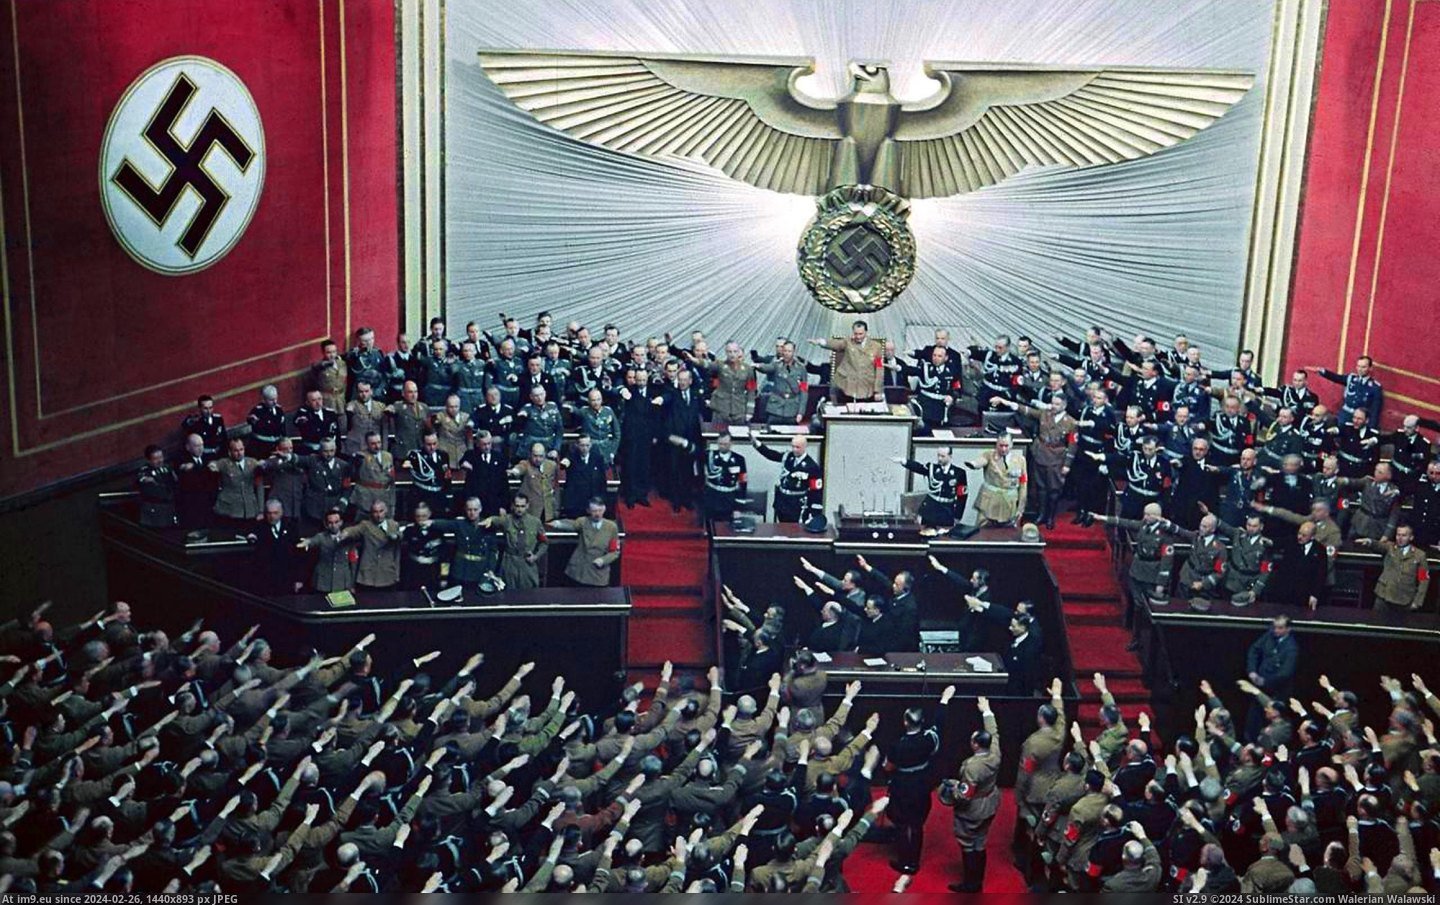 #Salute #D4xil72 #Themistrunsred #Reichstag Reichstag Salute By Themistrunsred D4Xil72 Pic. (Image of album Historical photos of nazi Germany))